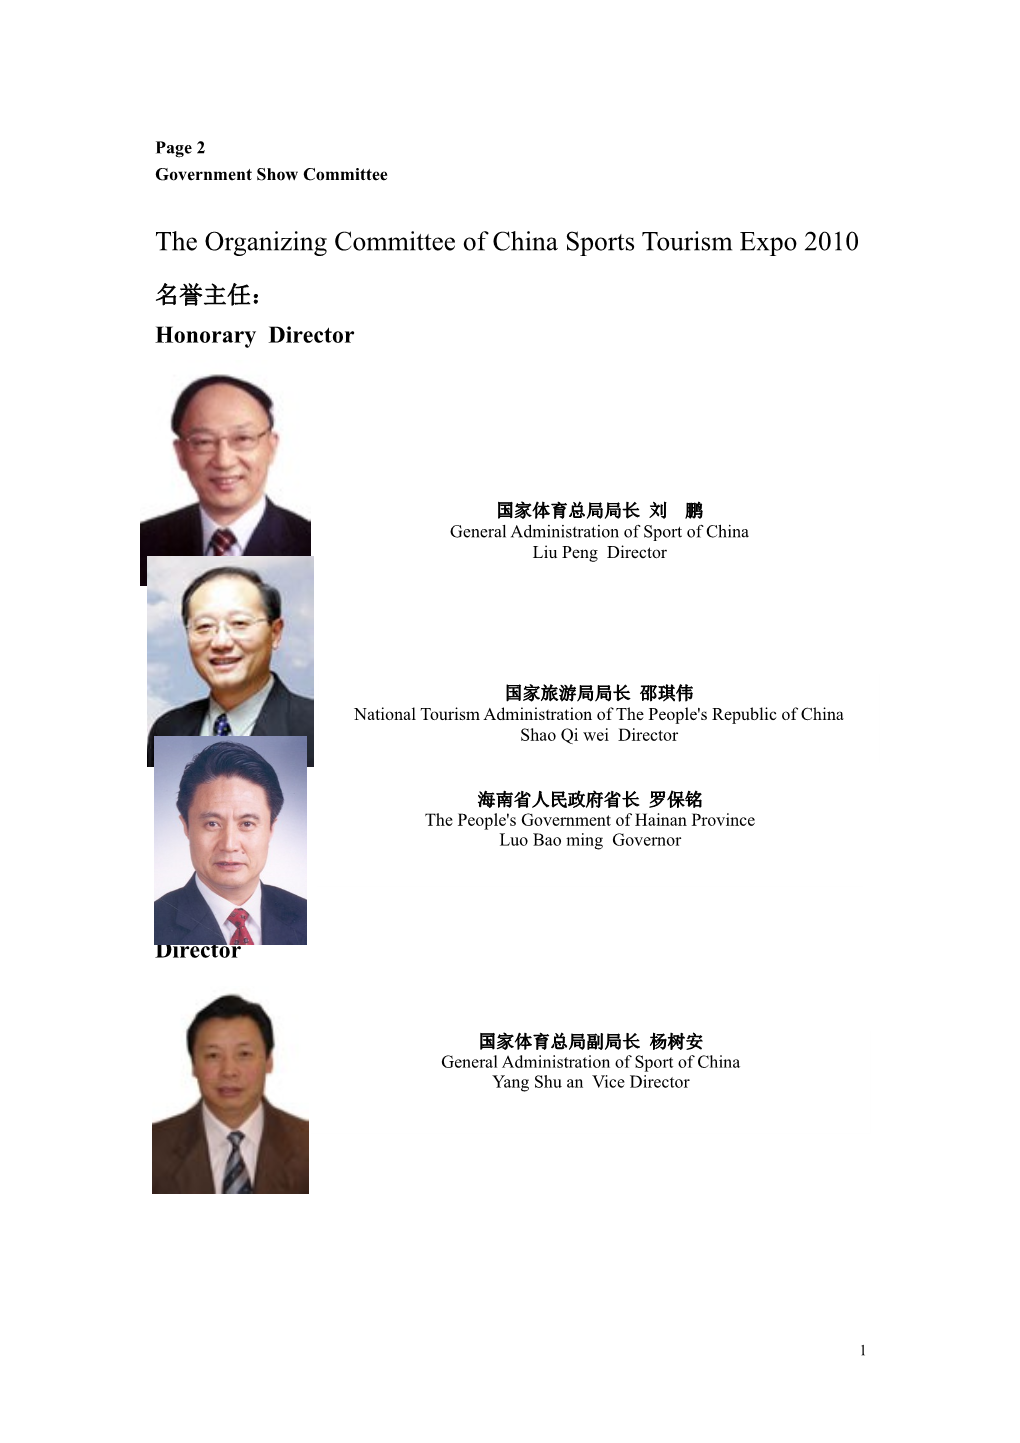 The Organizing Committee of China Sports Tourism Expo 2010